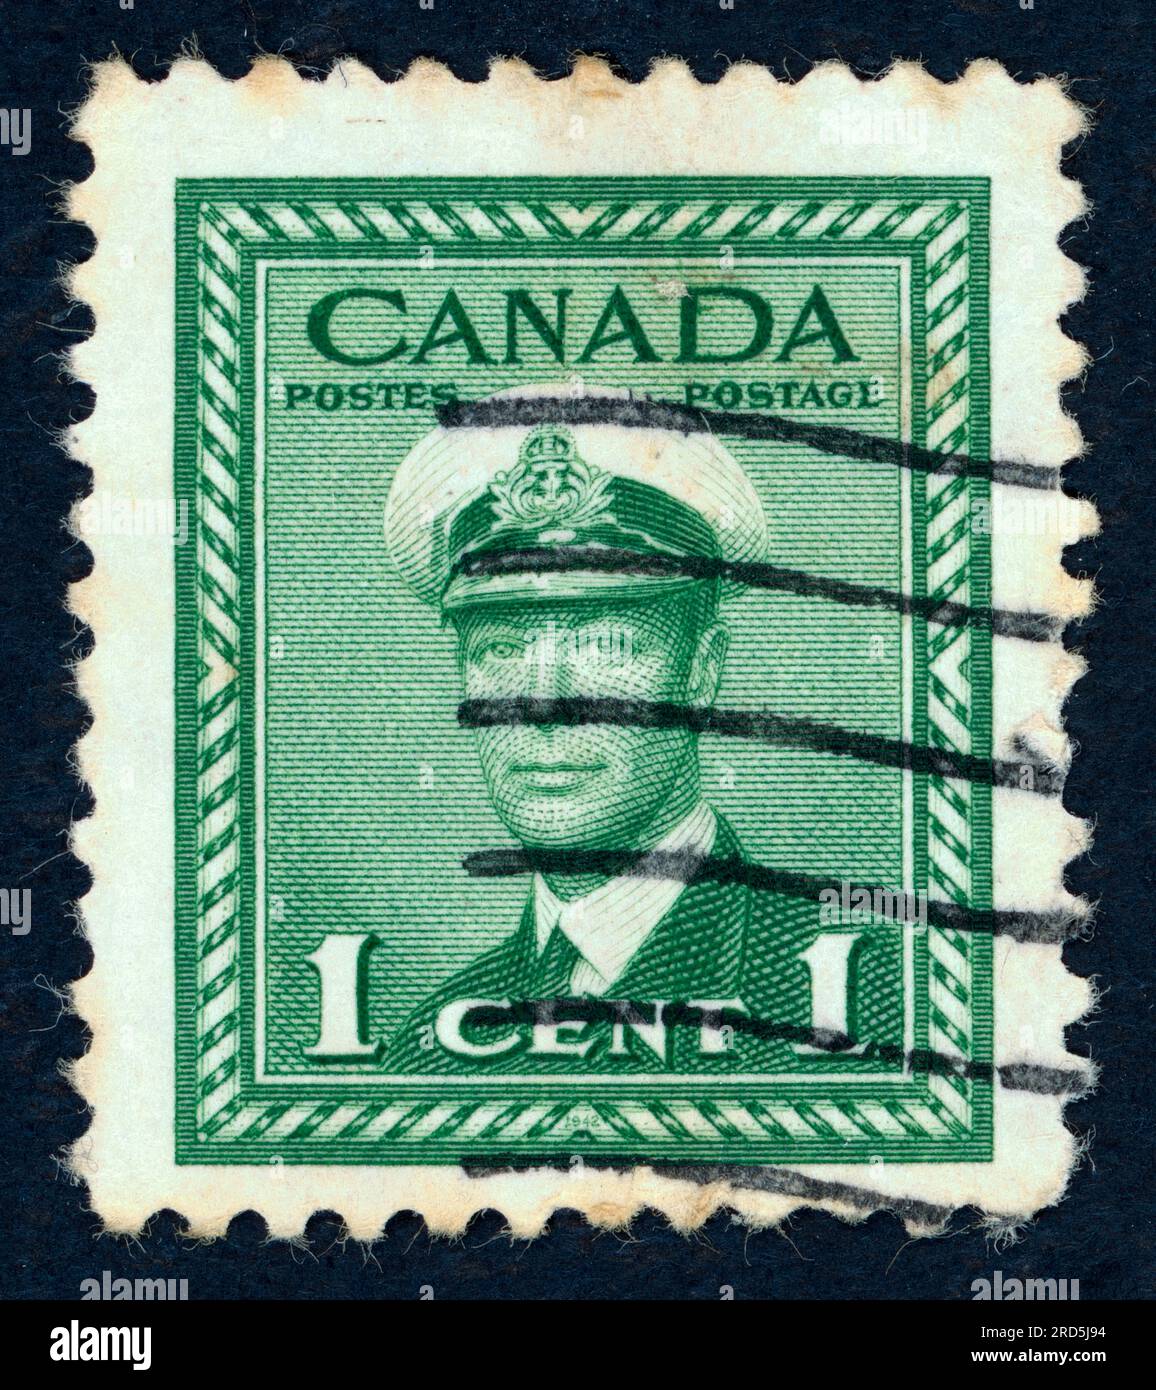 George VI (Albert Frederick Arthur George; 1895 – 1952), King of the United Kingdom and the Dominions of the British Commonwealth from 1936 until his death in 1952. Postage stamp issued in Canada in 1948. Stock Photo